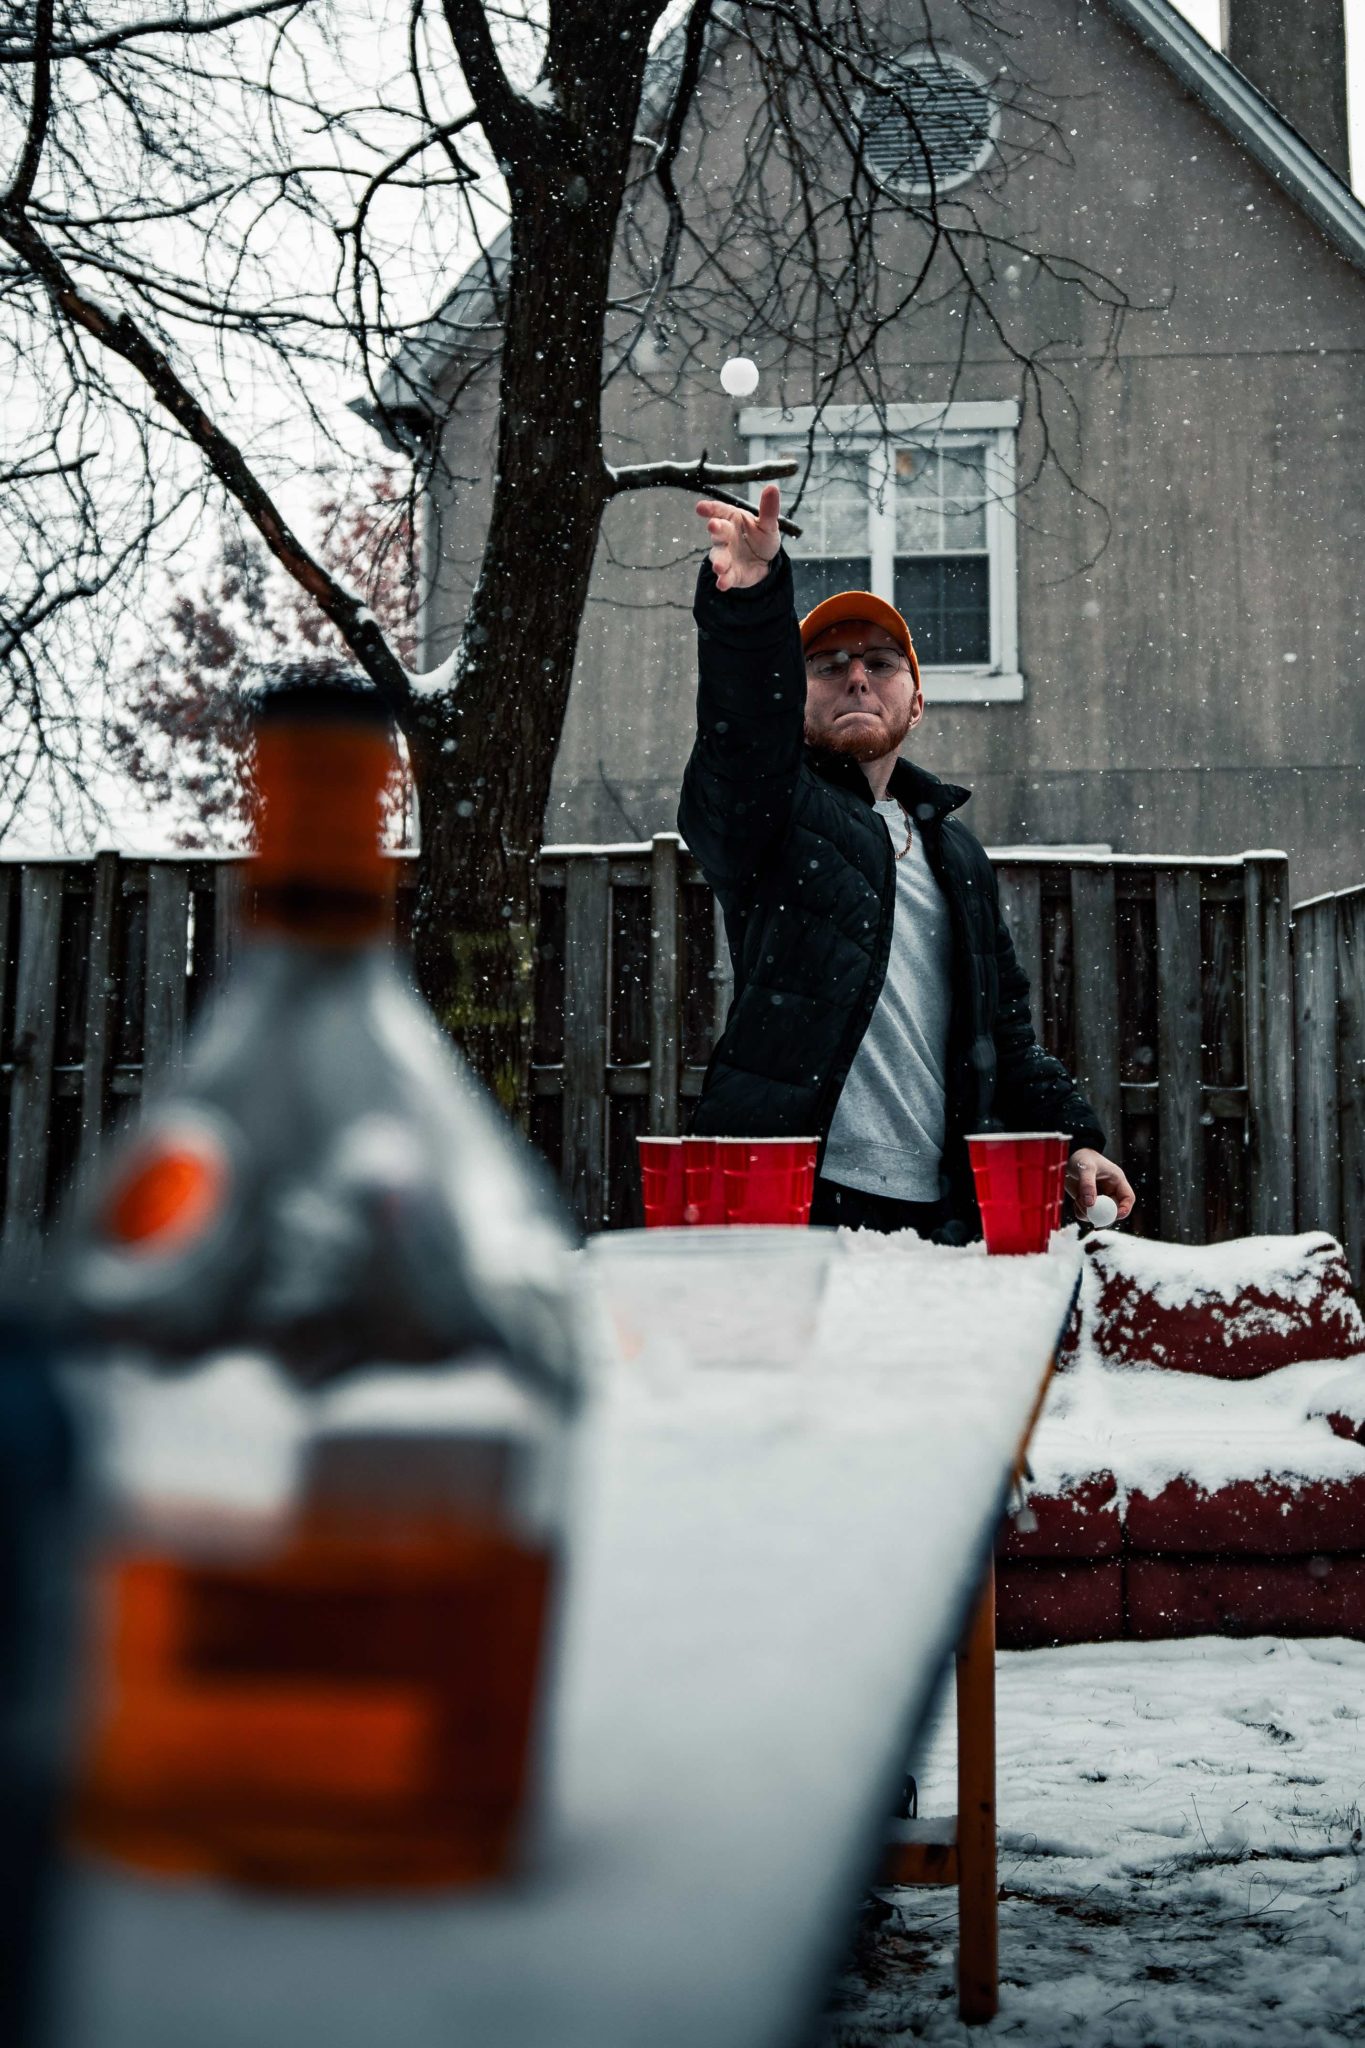 fraternity brother playing beer pong in the snow